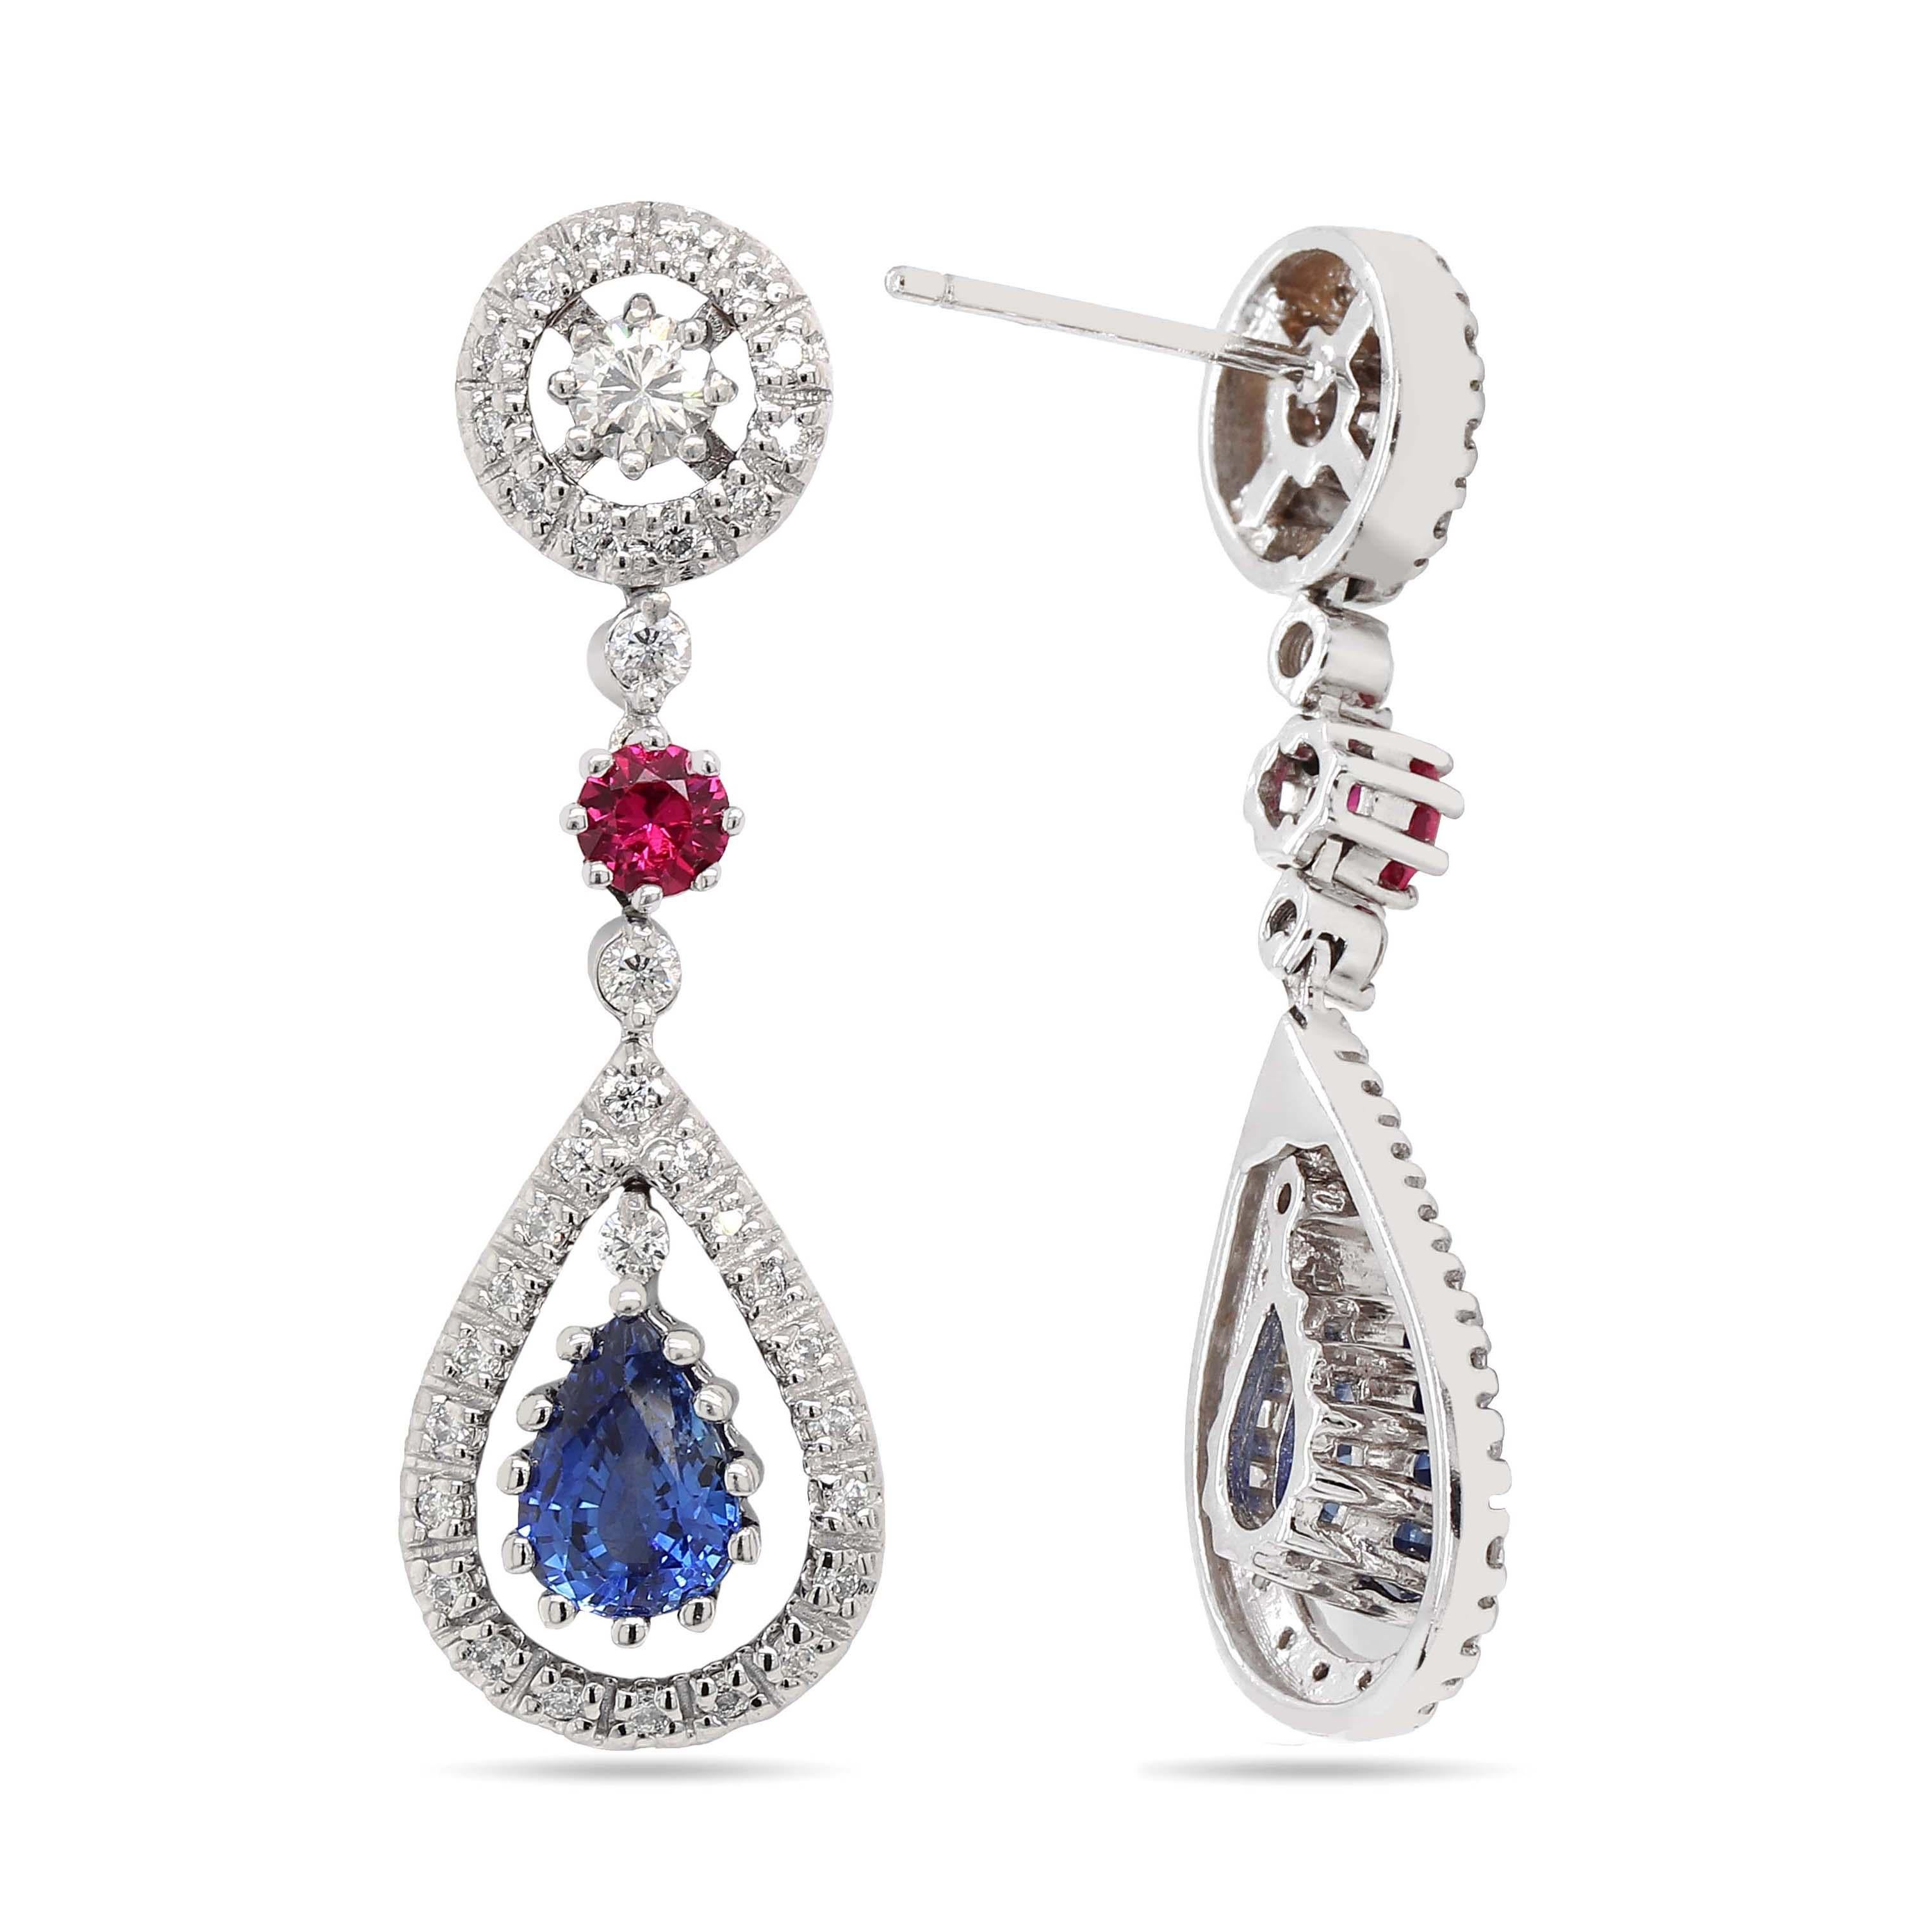 Blue Pear Shape Sapphires Earrings in 14k White Gold In New Condition For Sale In Houston, TX